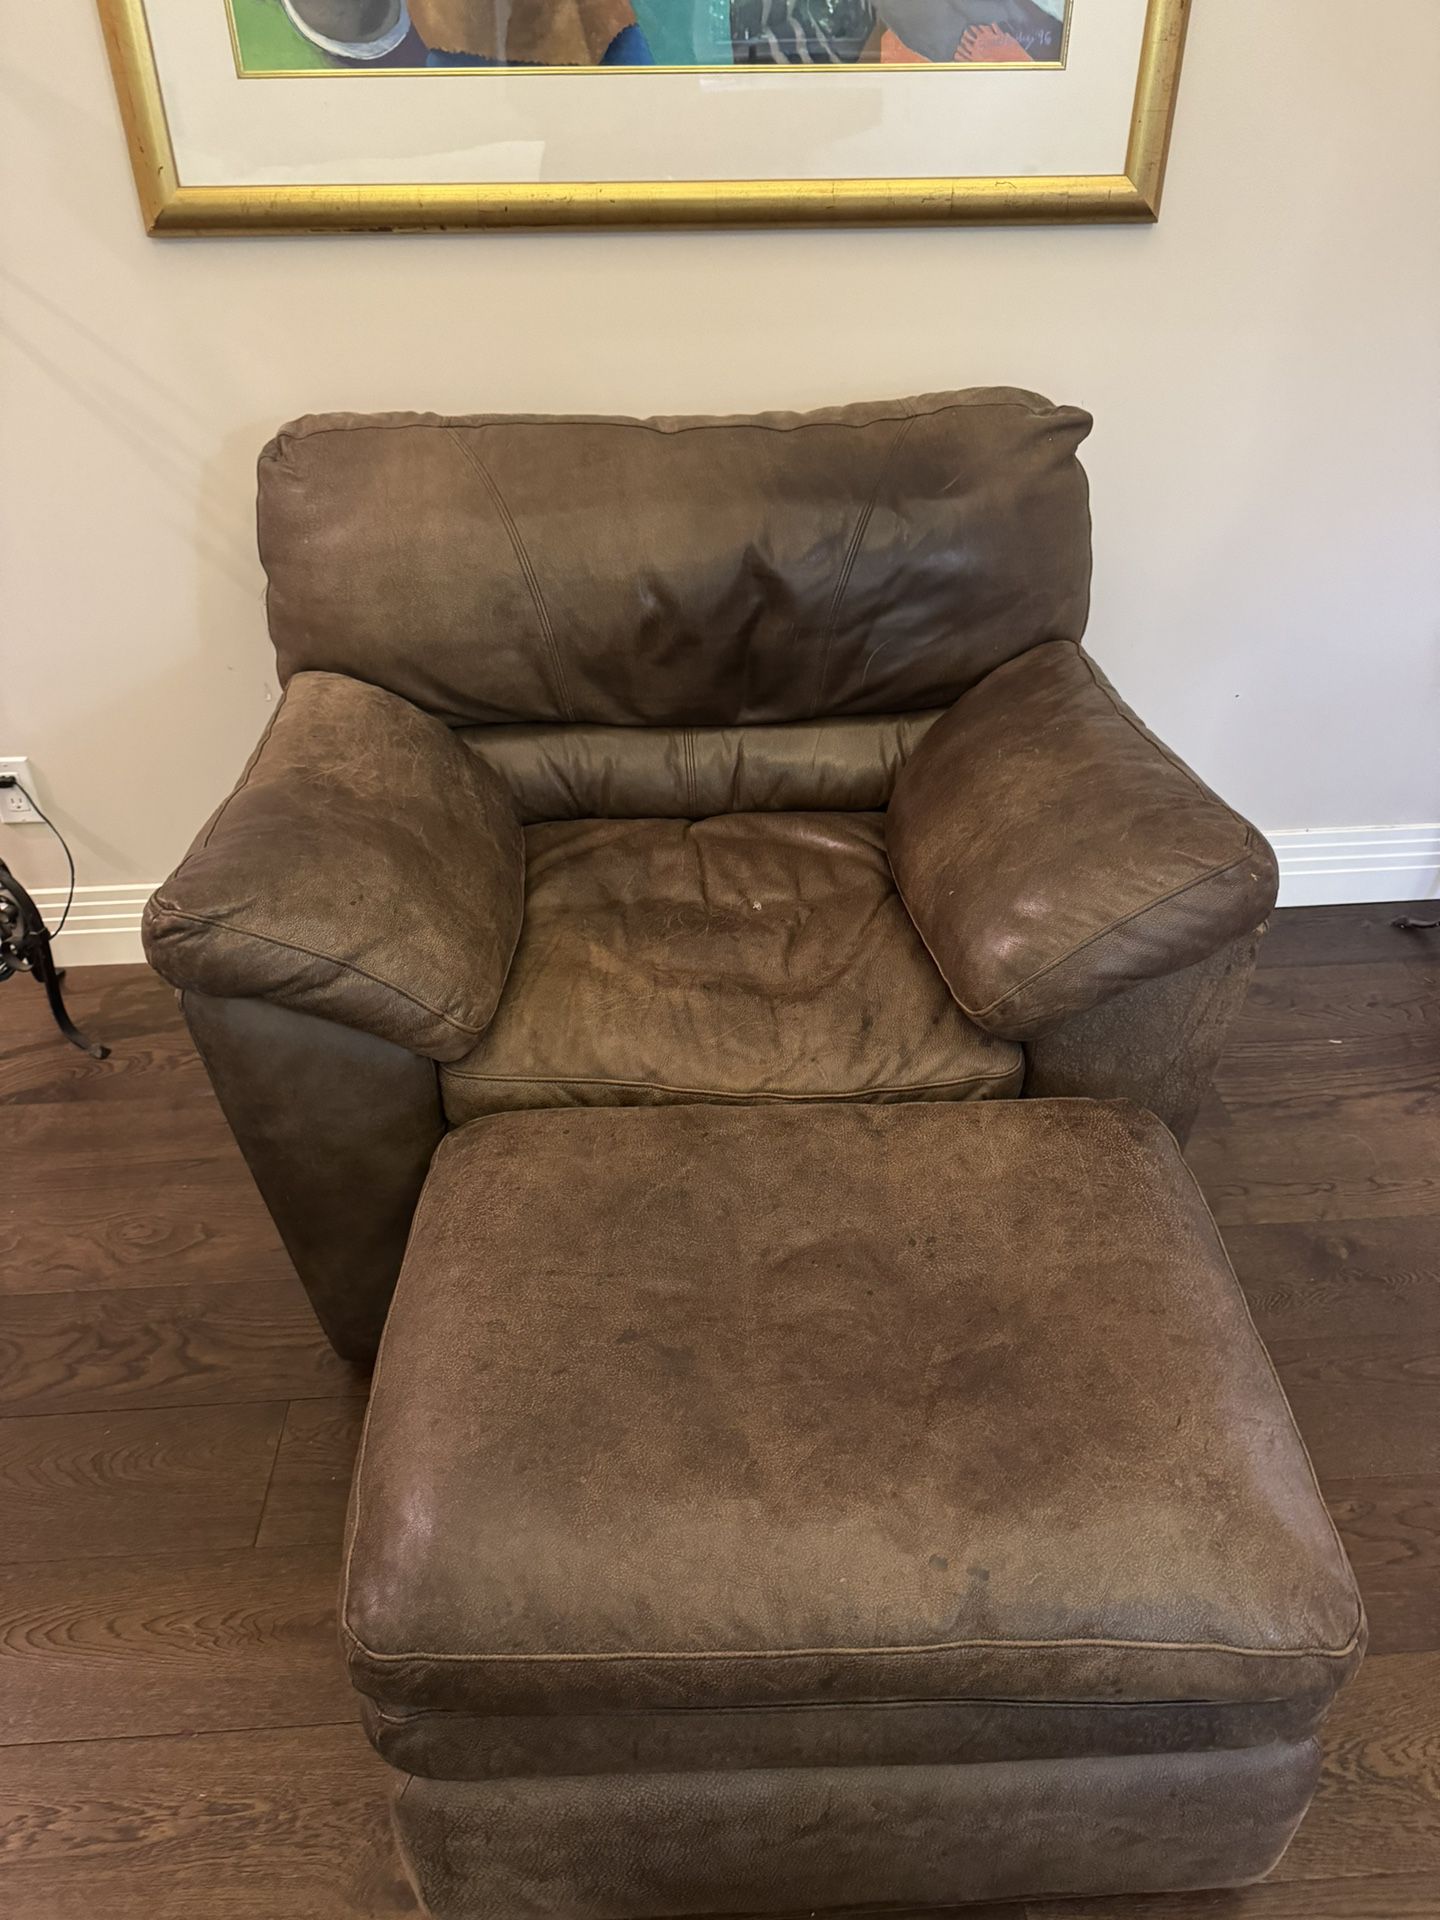 Oversized brown soft plush leather chair and ottoman set.